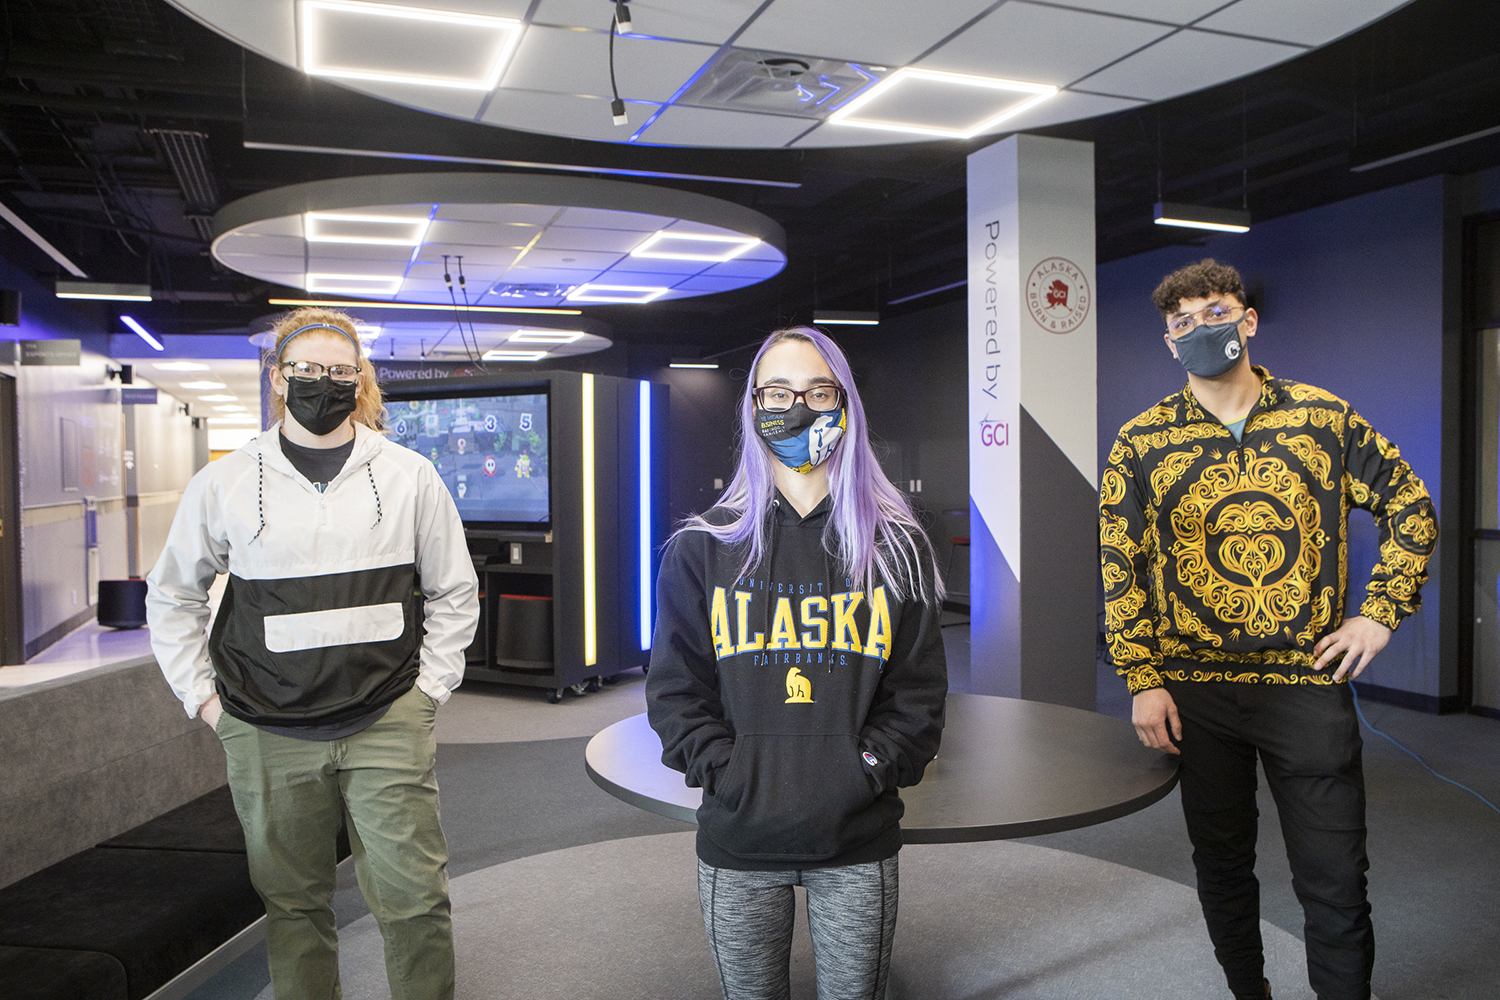 From left, Victoria Pennington (interdisciplinary studies), Shayna Smith (sport and recreation business) and Kyle Agustines (art) helped introduce UAF's esports center in a video produced for the virtual grand opening. UAF photo by JR Ancheta.